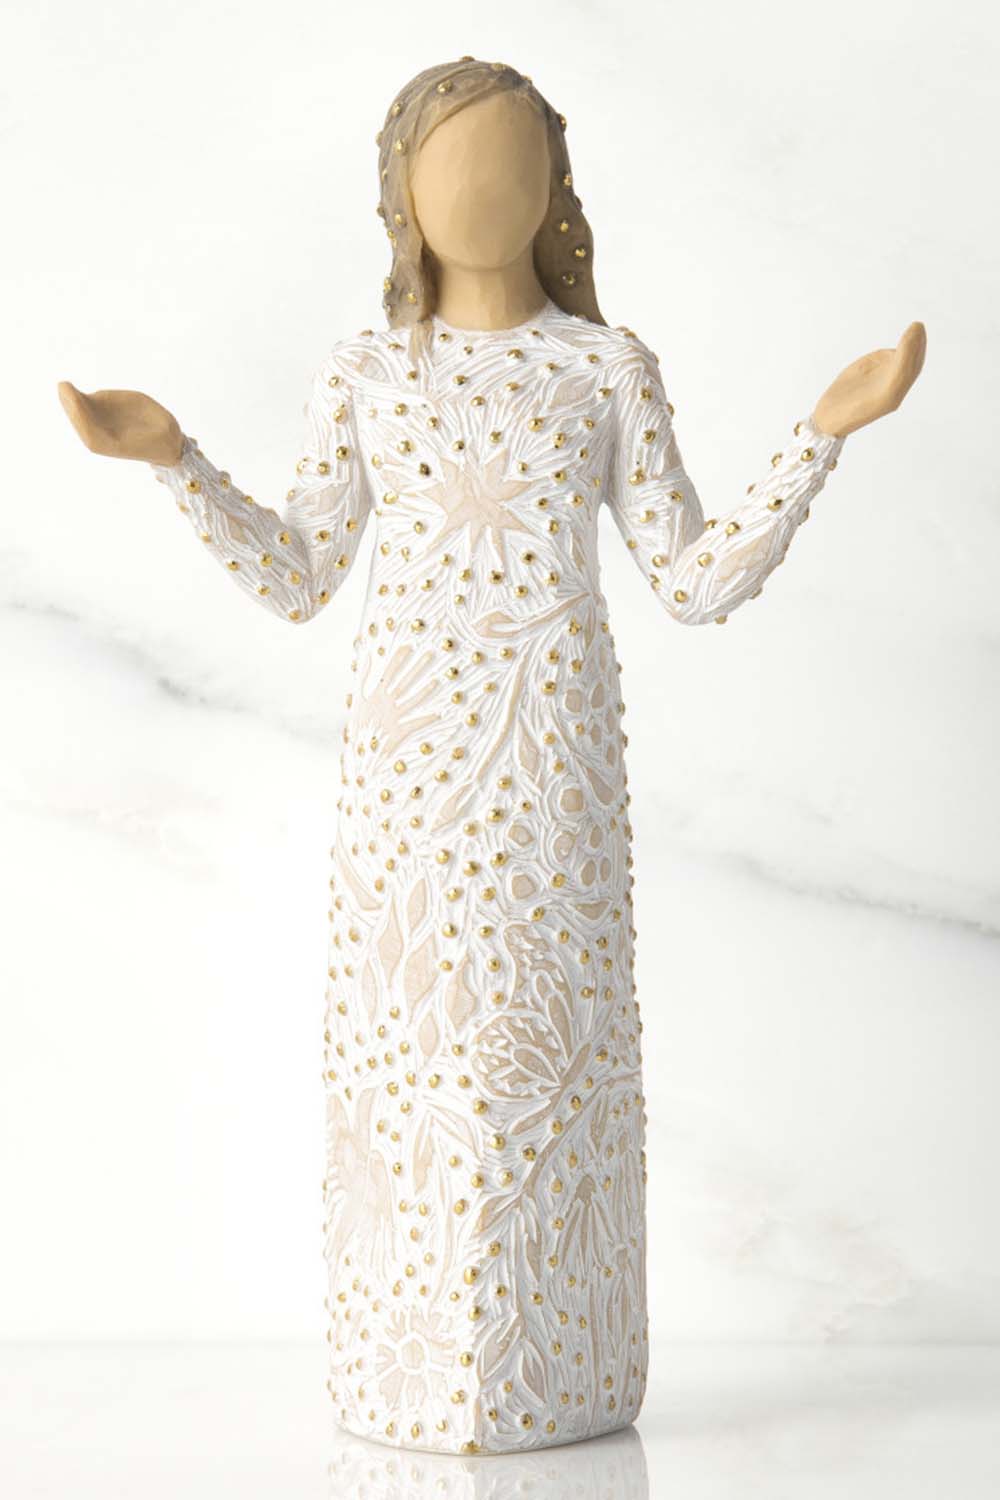 Willow Tree Figure - Everyday Blessings